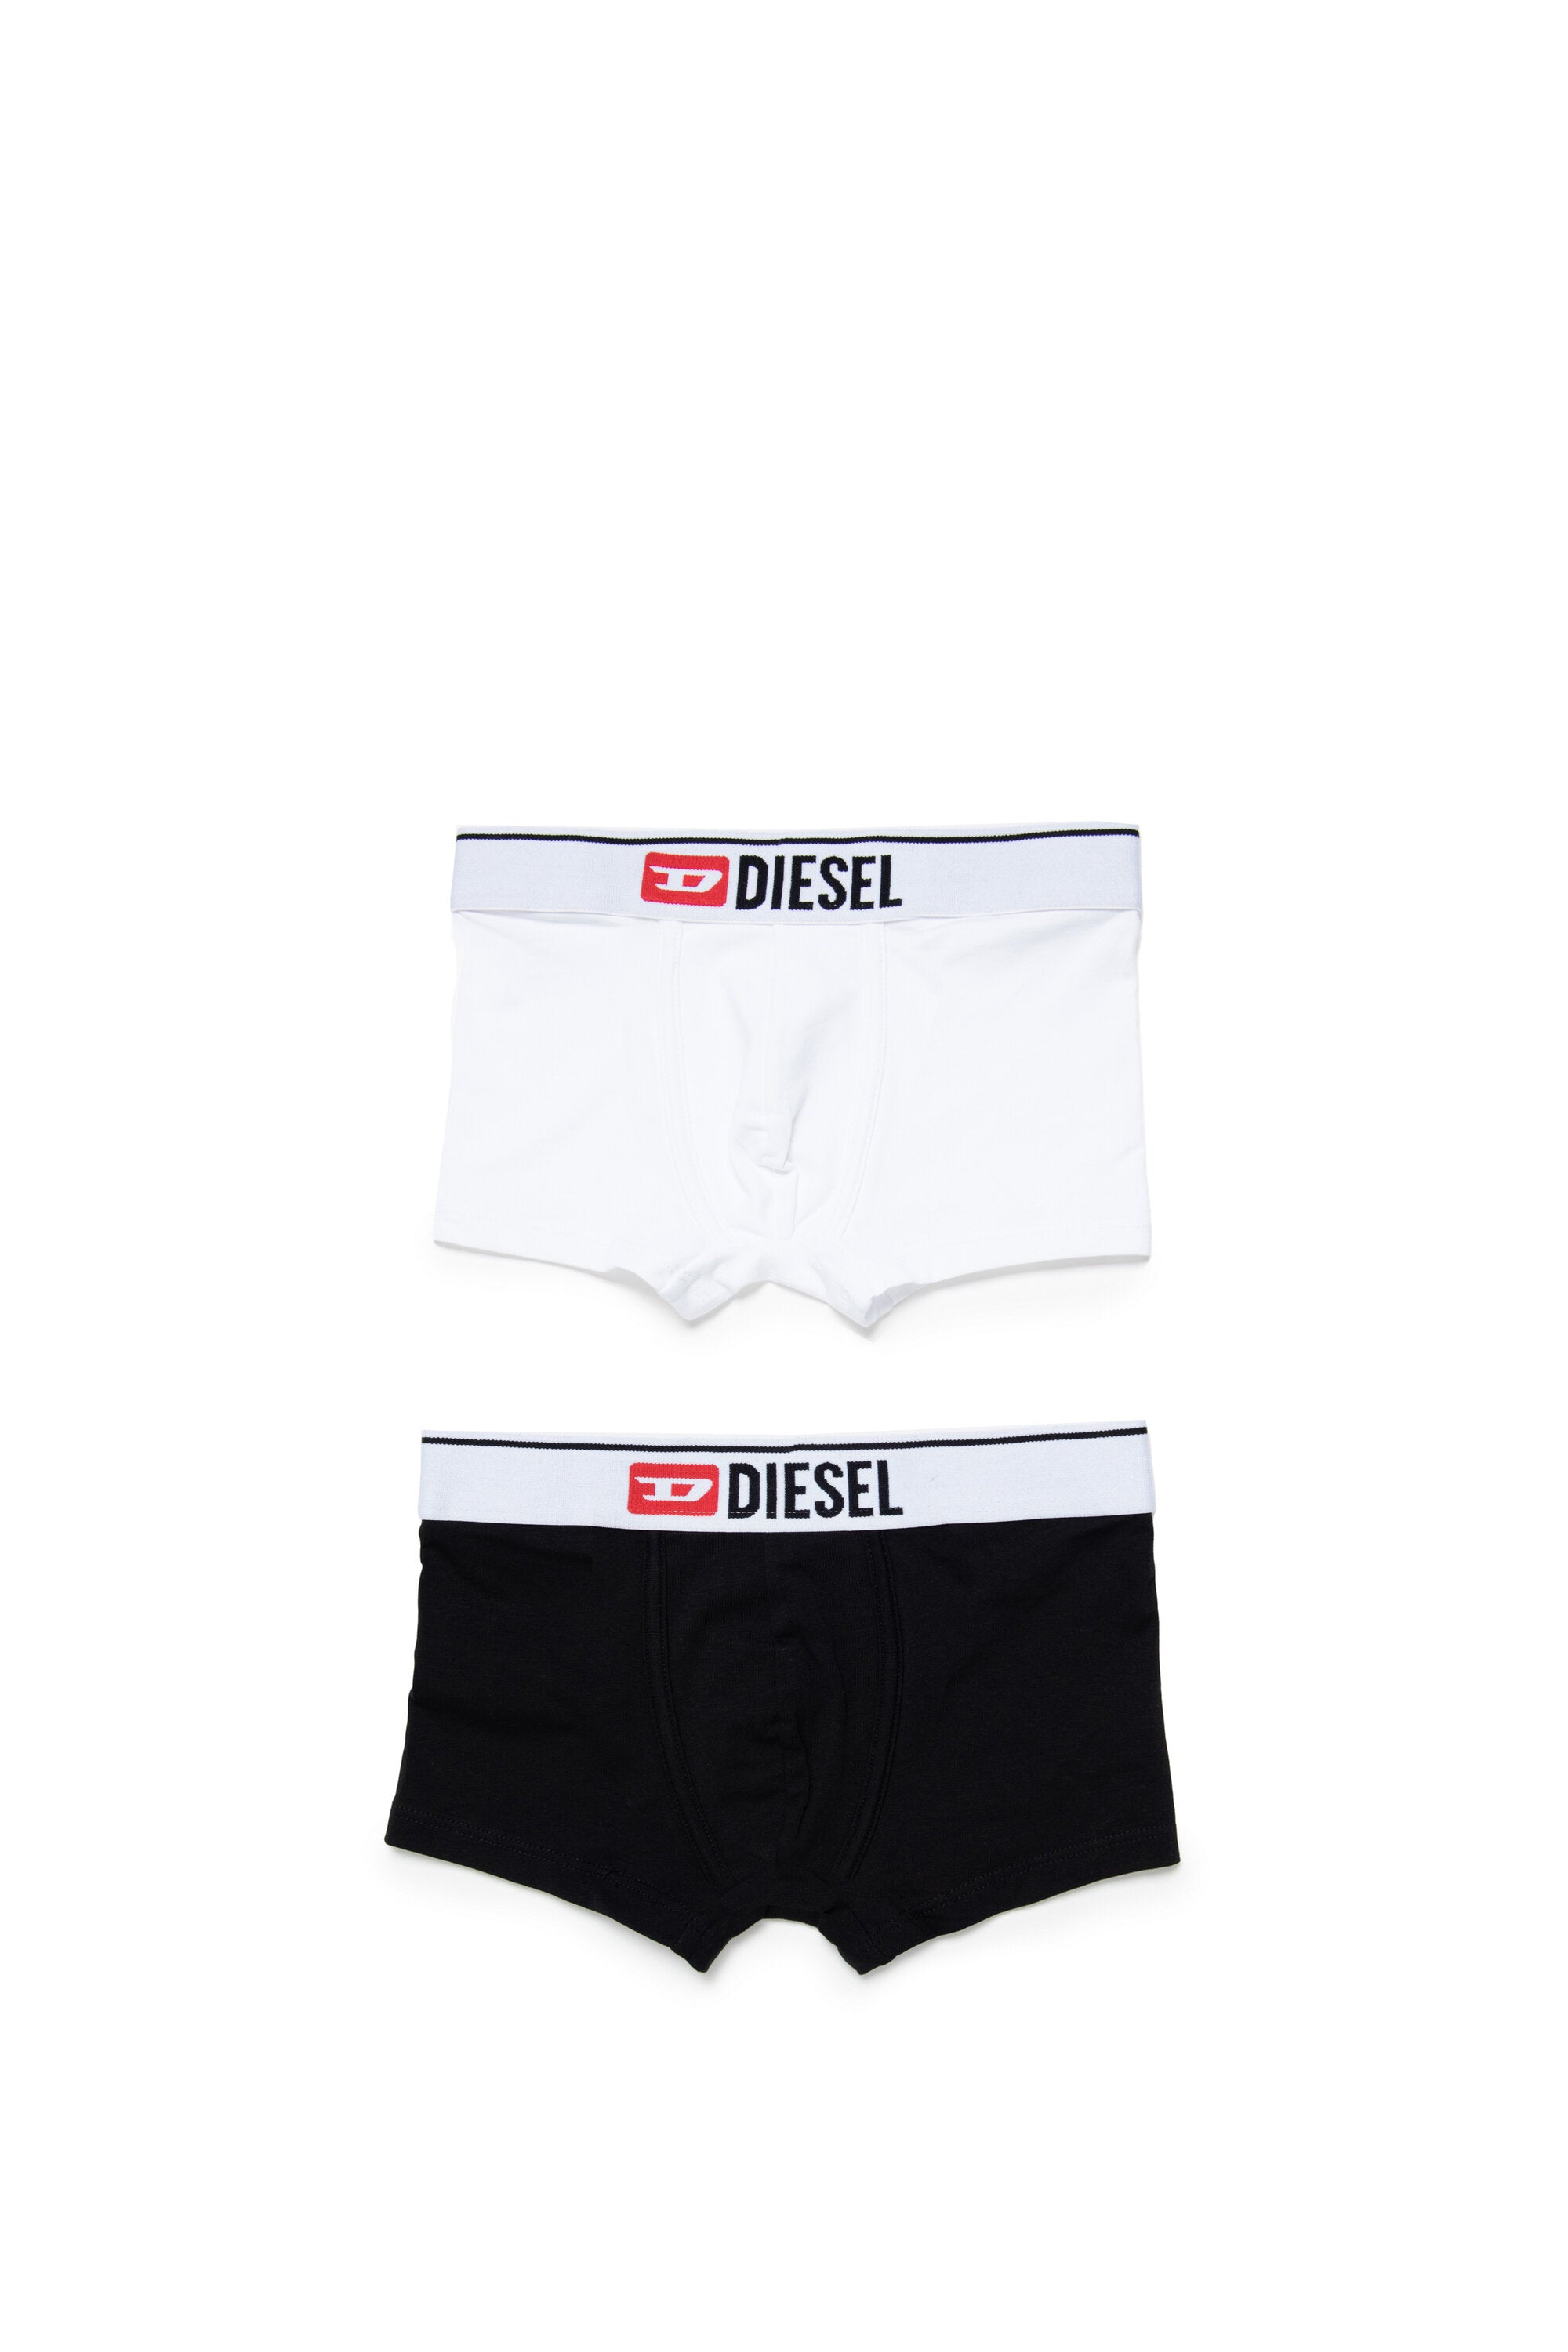 Branded jersey boxer shorts - 2 pairs